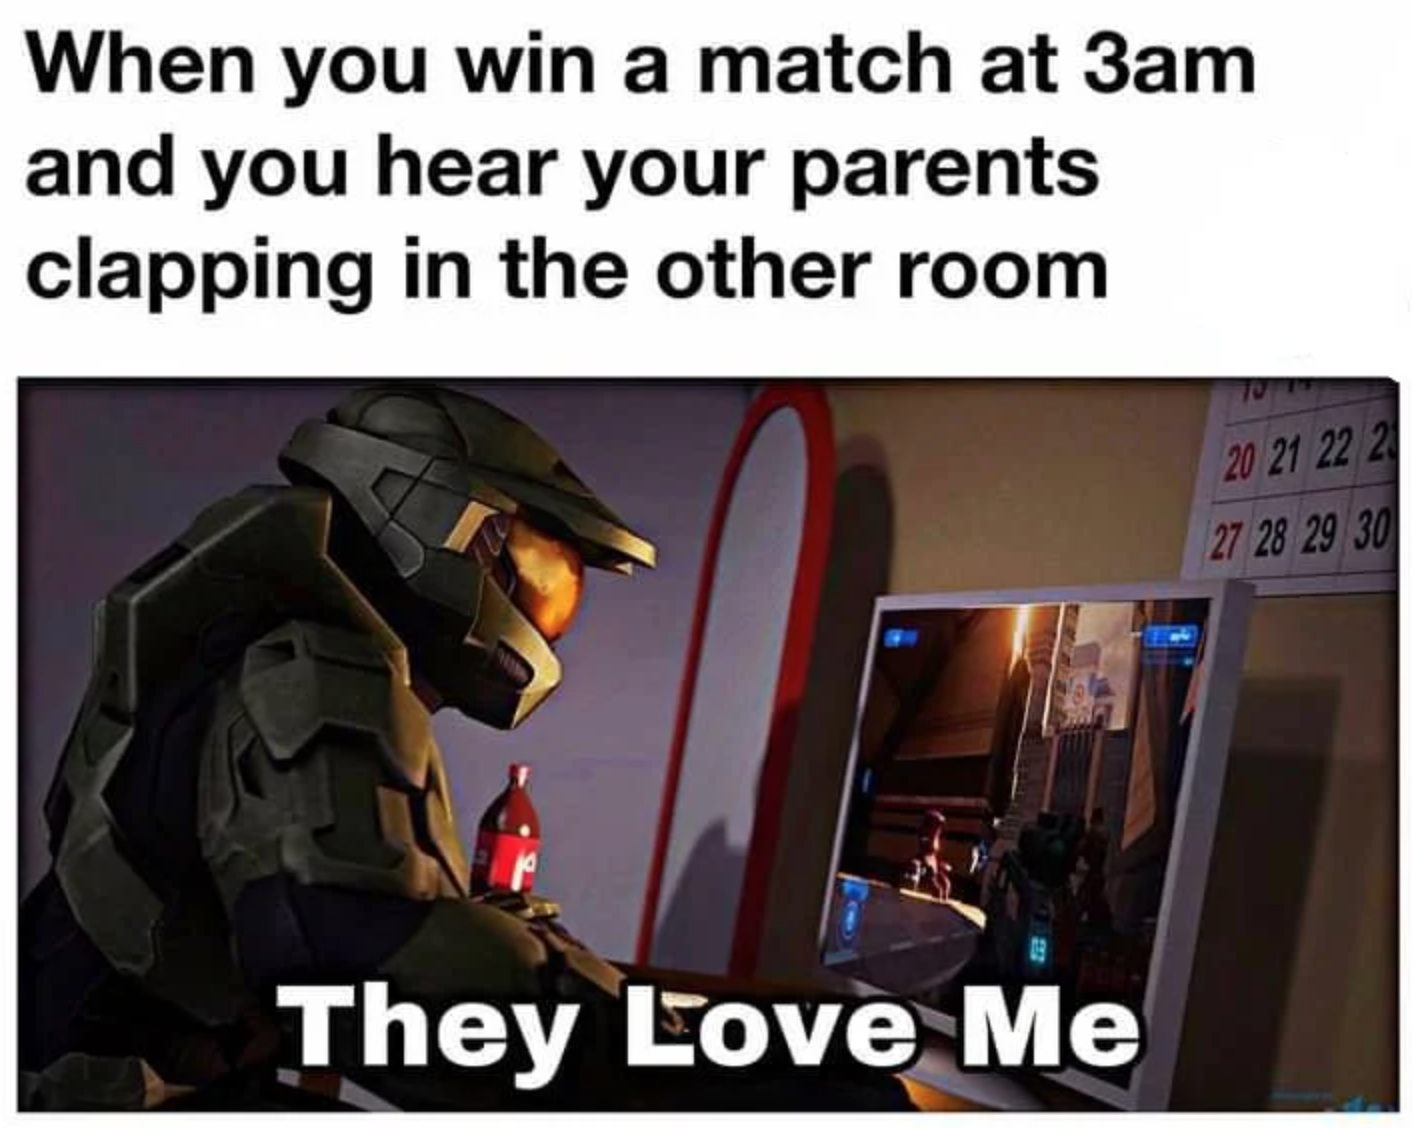 funny gaming memes  - never say never lyrics - When you win a match at 3am and you hear your parents clapping in the other room 20 21 22 23 27 28 29 30 They Love Me